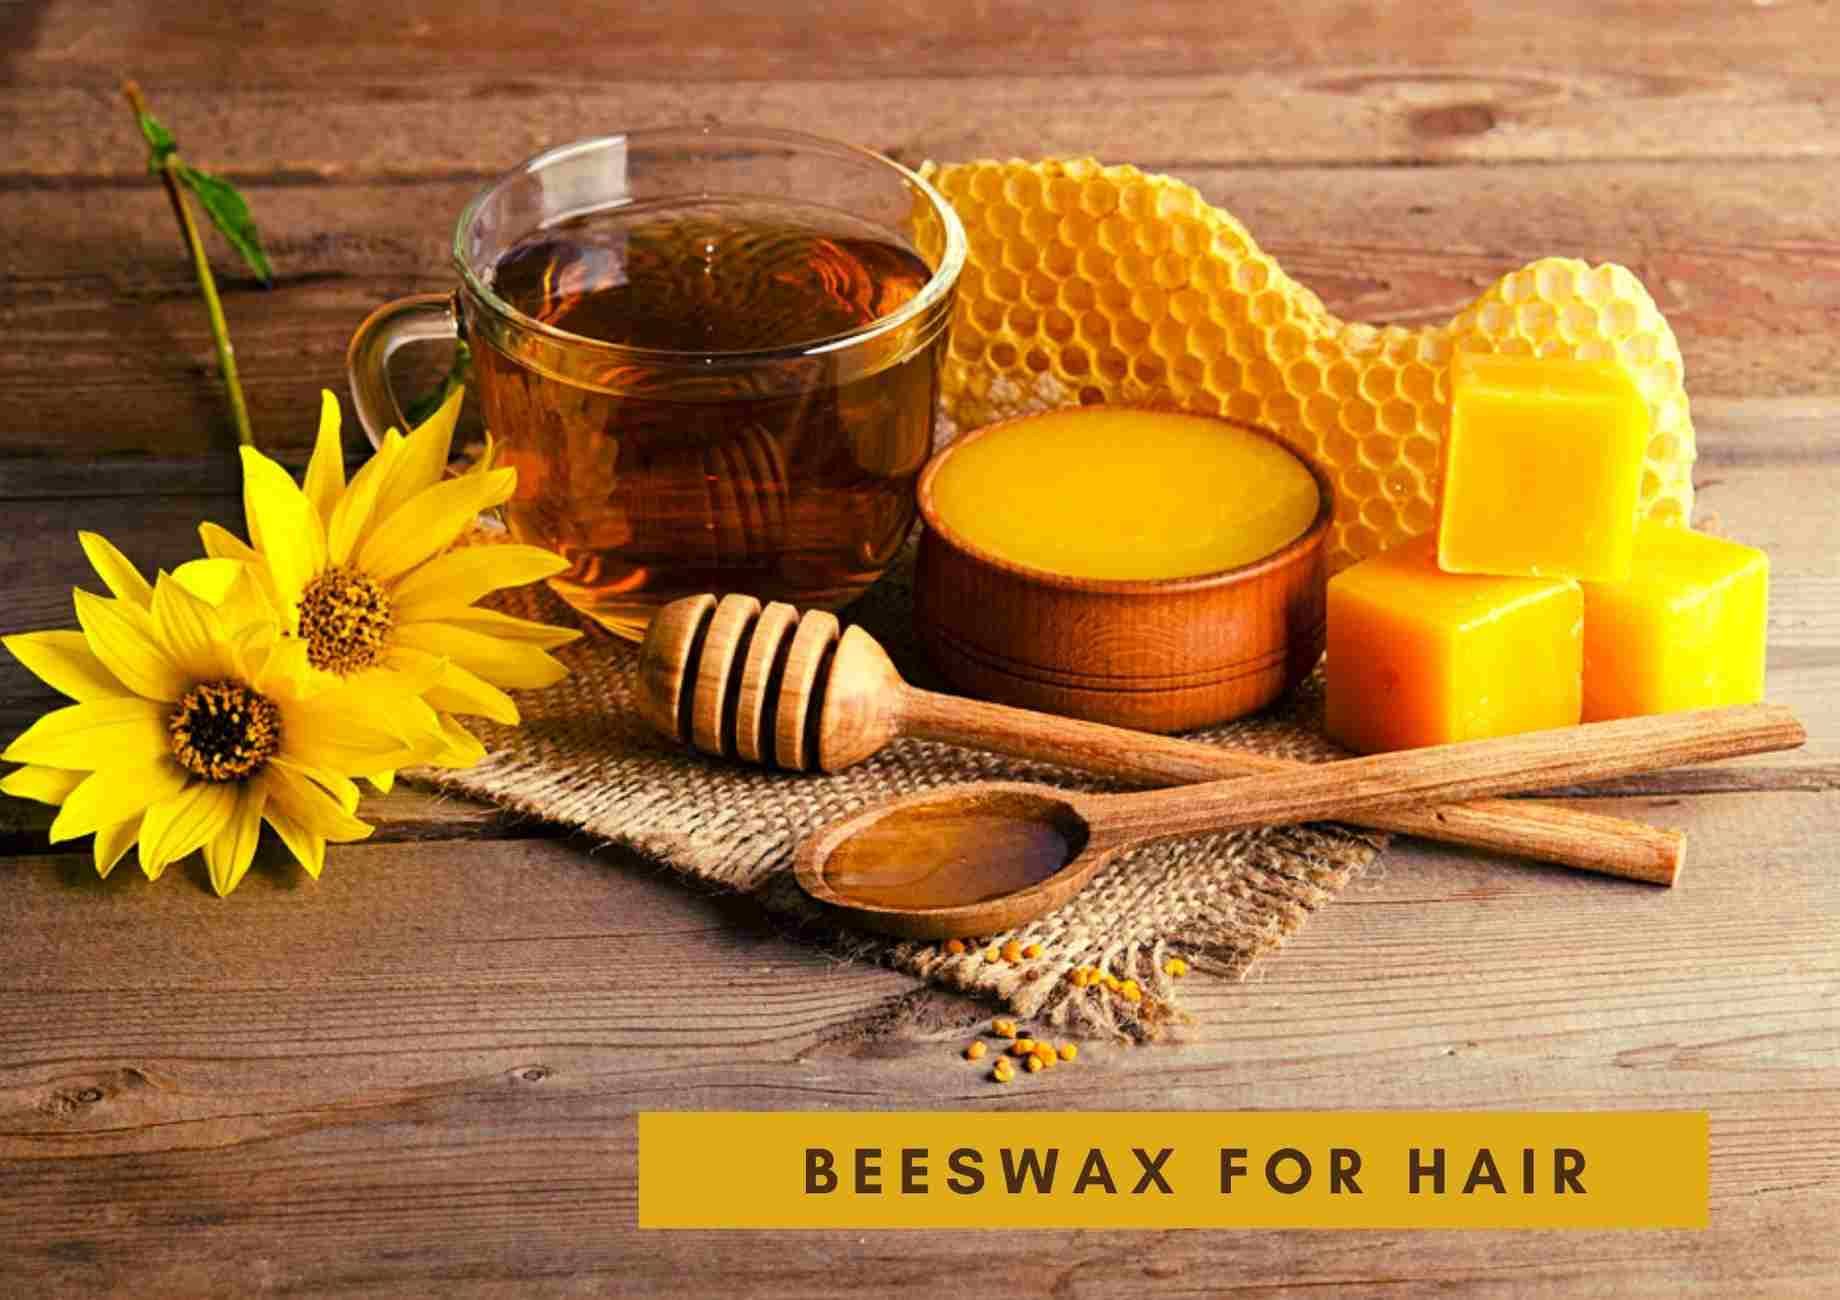 Beeswax benefits for hair